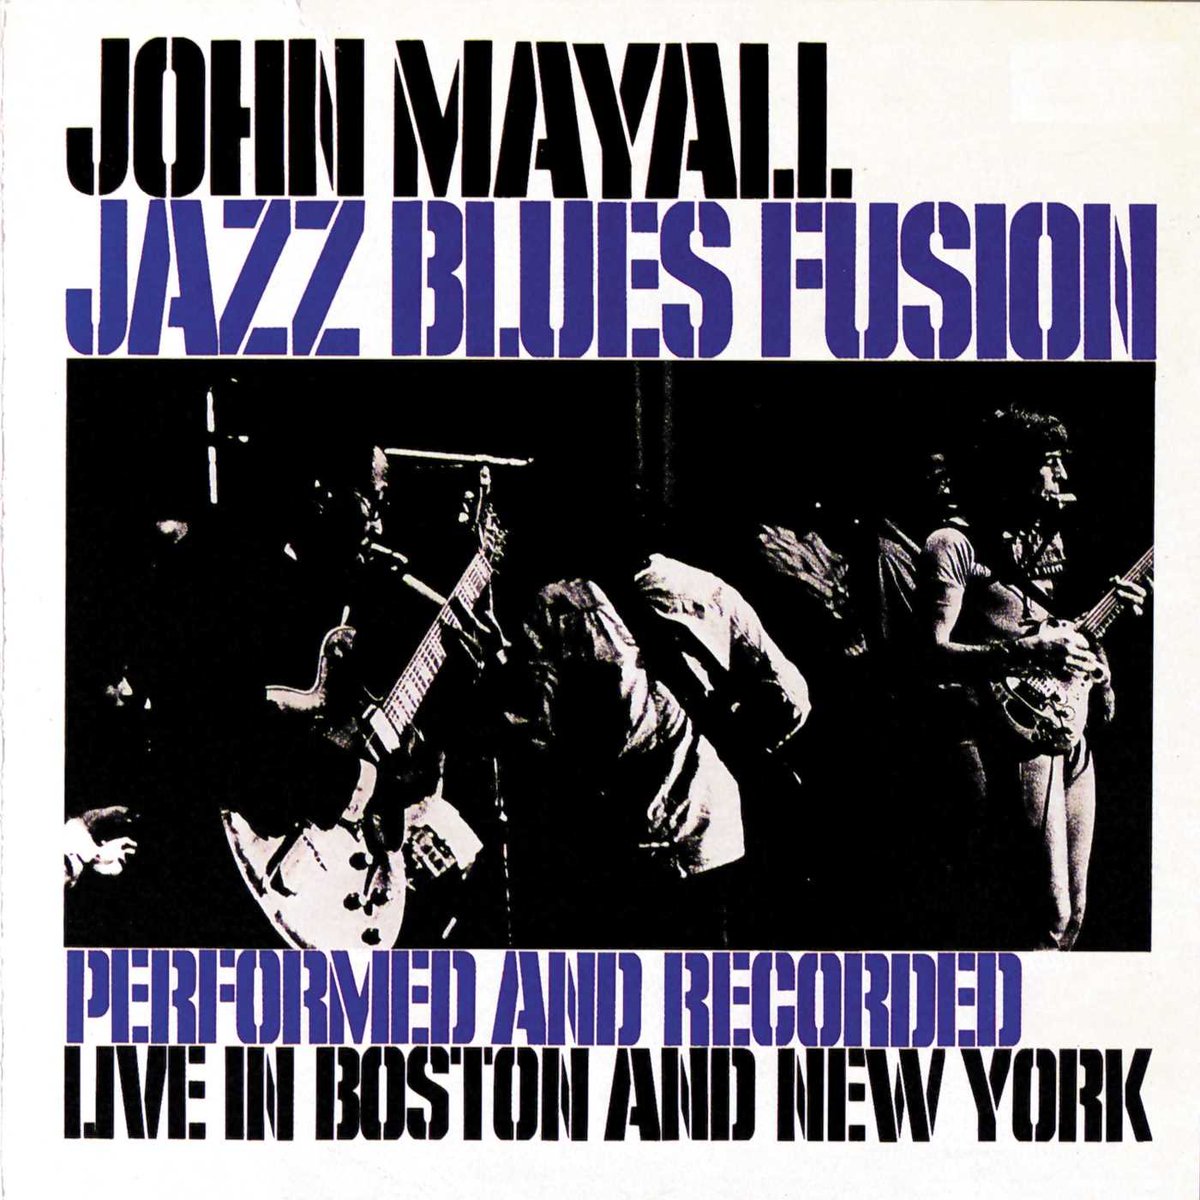 John Mayall - Jazz Blues Fusion, 1972 
It is not a trivial album starting from the repertoire and if the songs are perhaps not classics  that remain in the head,there is an enviable groove and instrumental expertise thanks also to the jazz grafts of the wind section. 
#JohnMayall